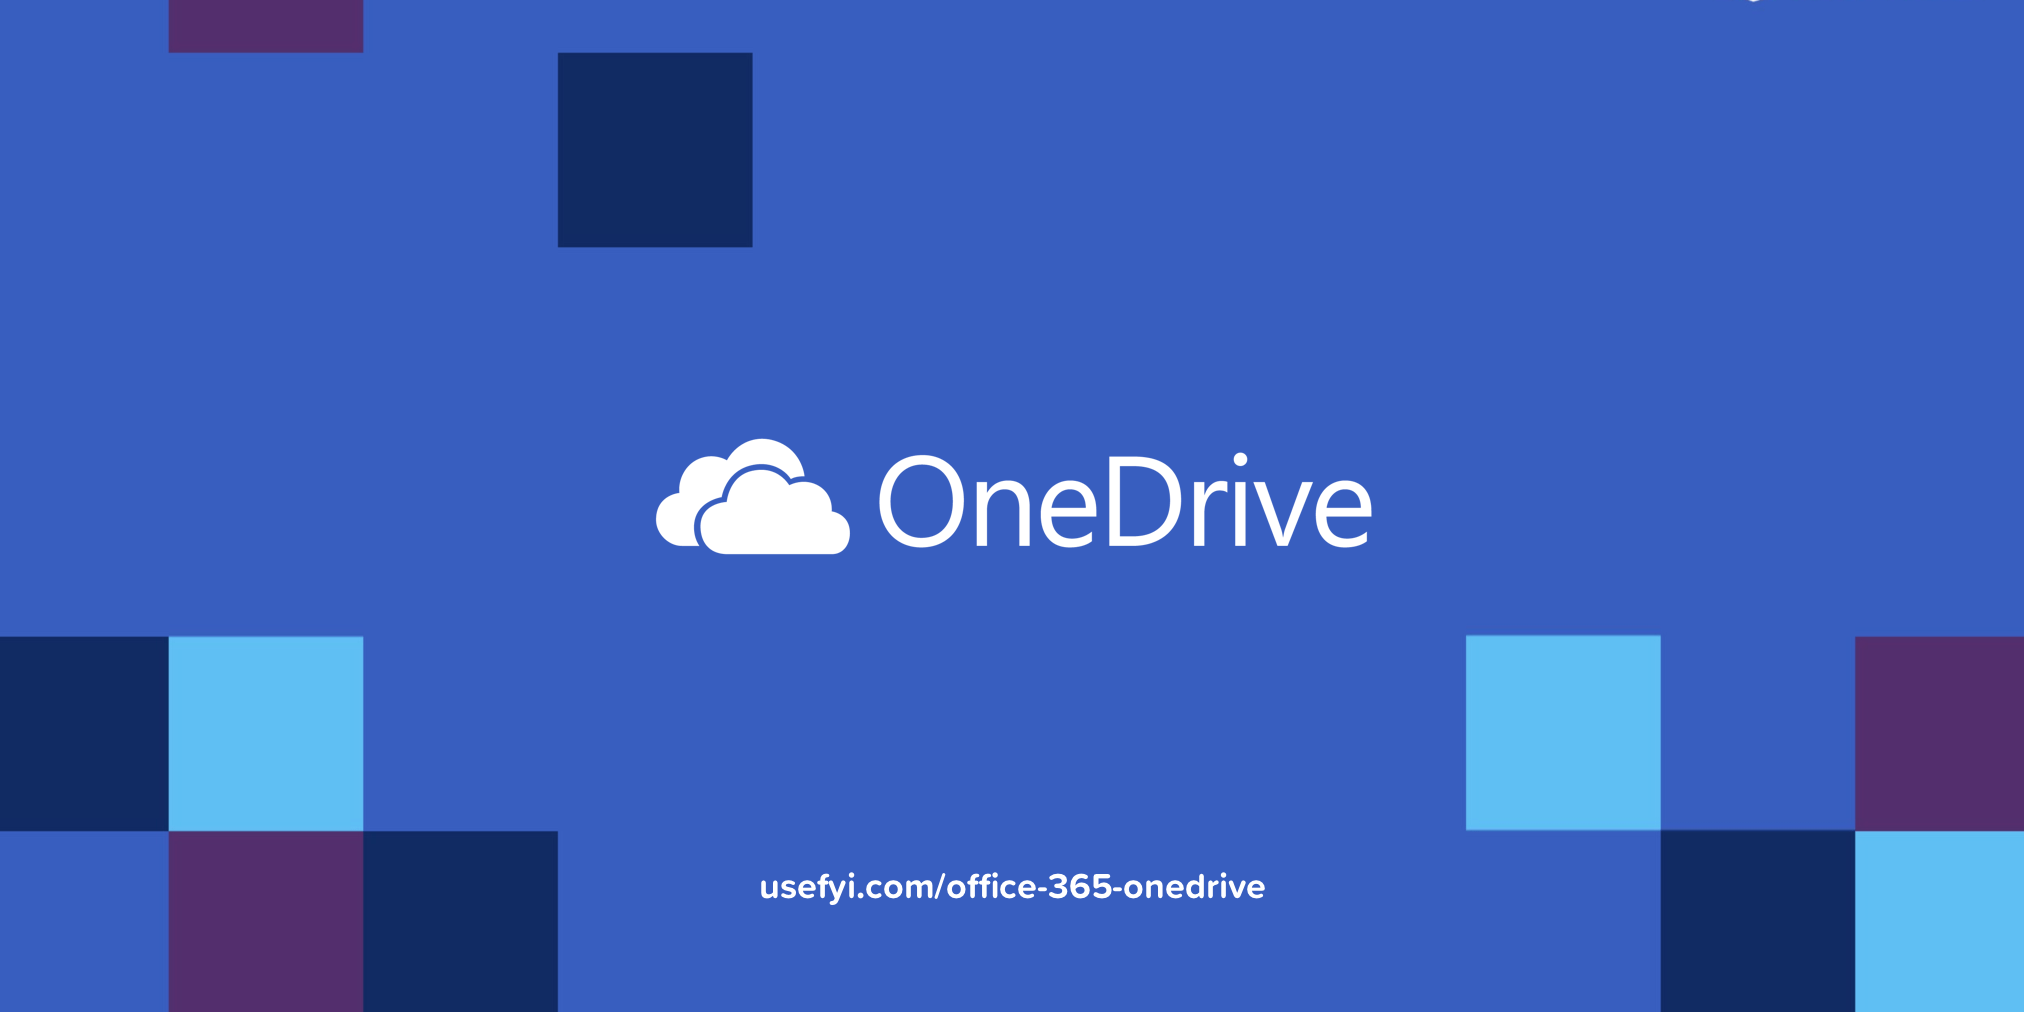 Office 365 OneDrive: Everything You Need to Know